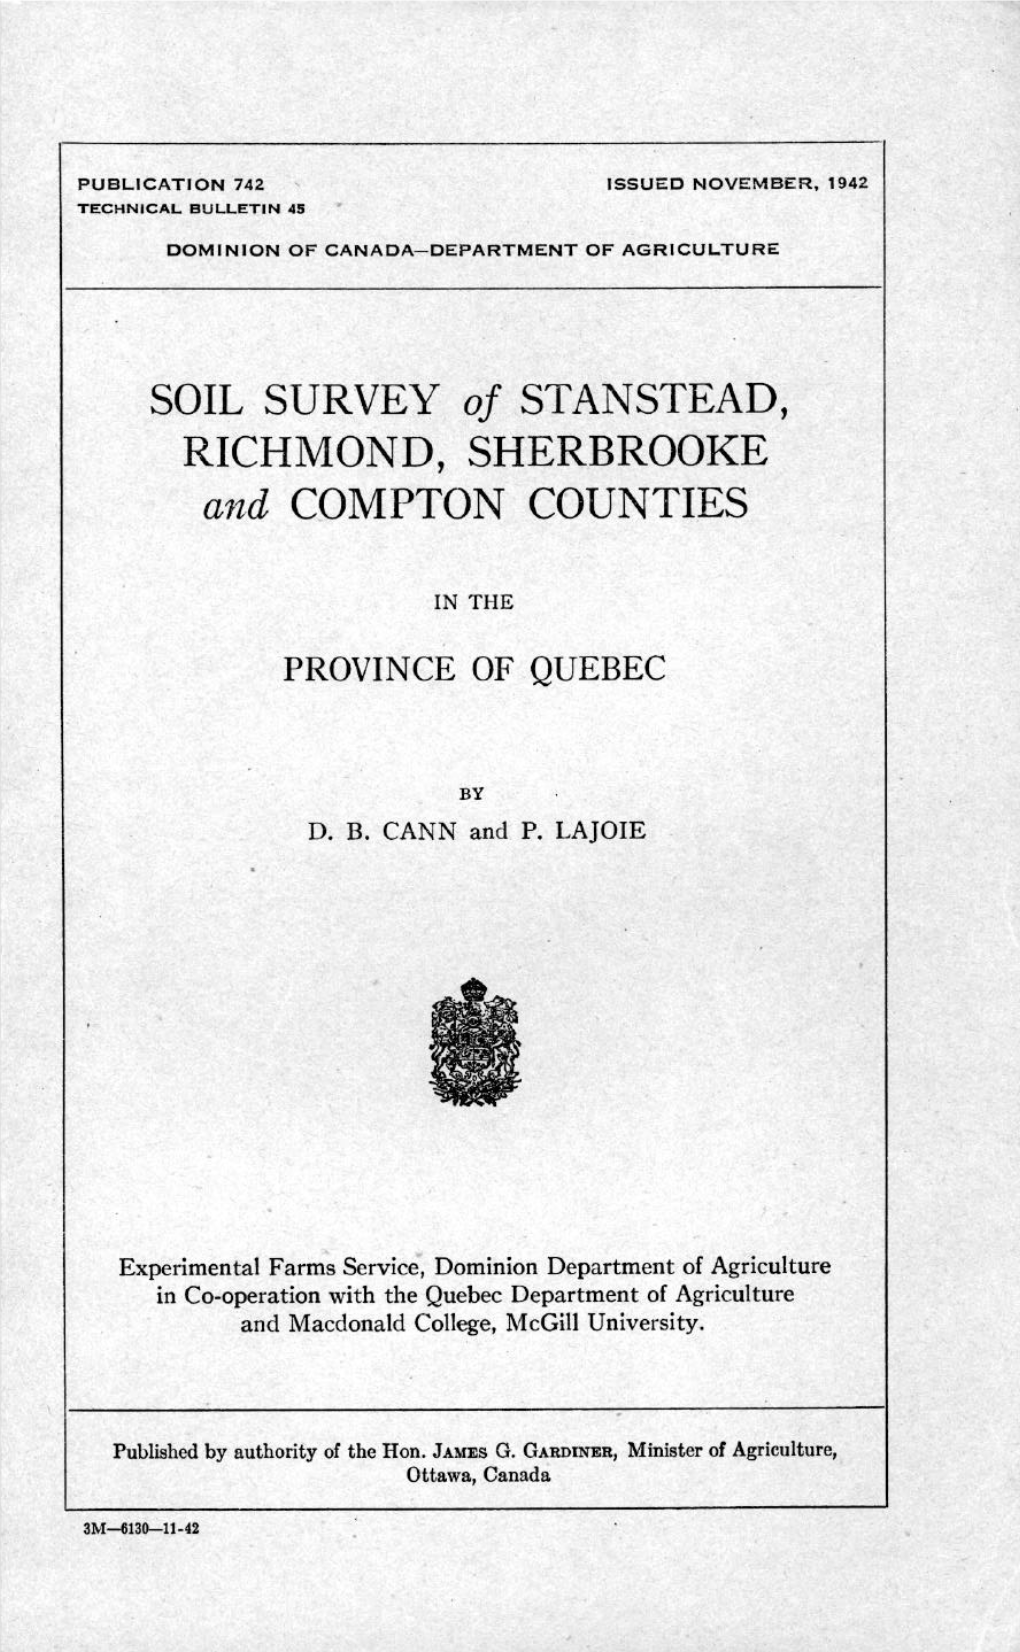 SOIL SURVEY of STANSTEAD, RICHMOND, SHERBROOKE and COMPTON COUNTIES